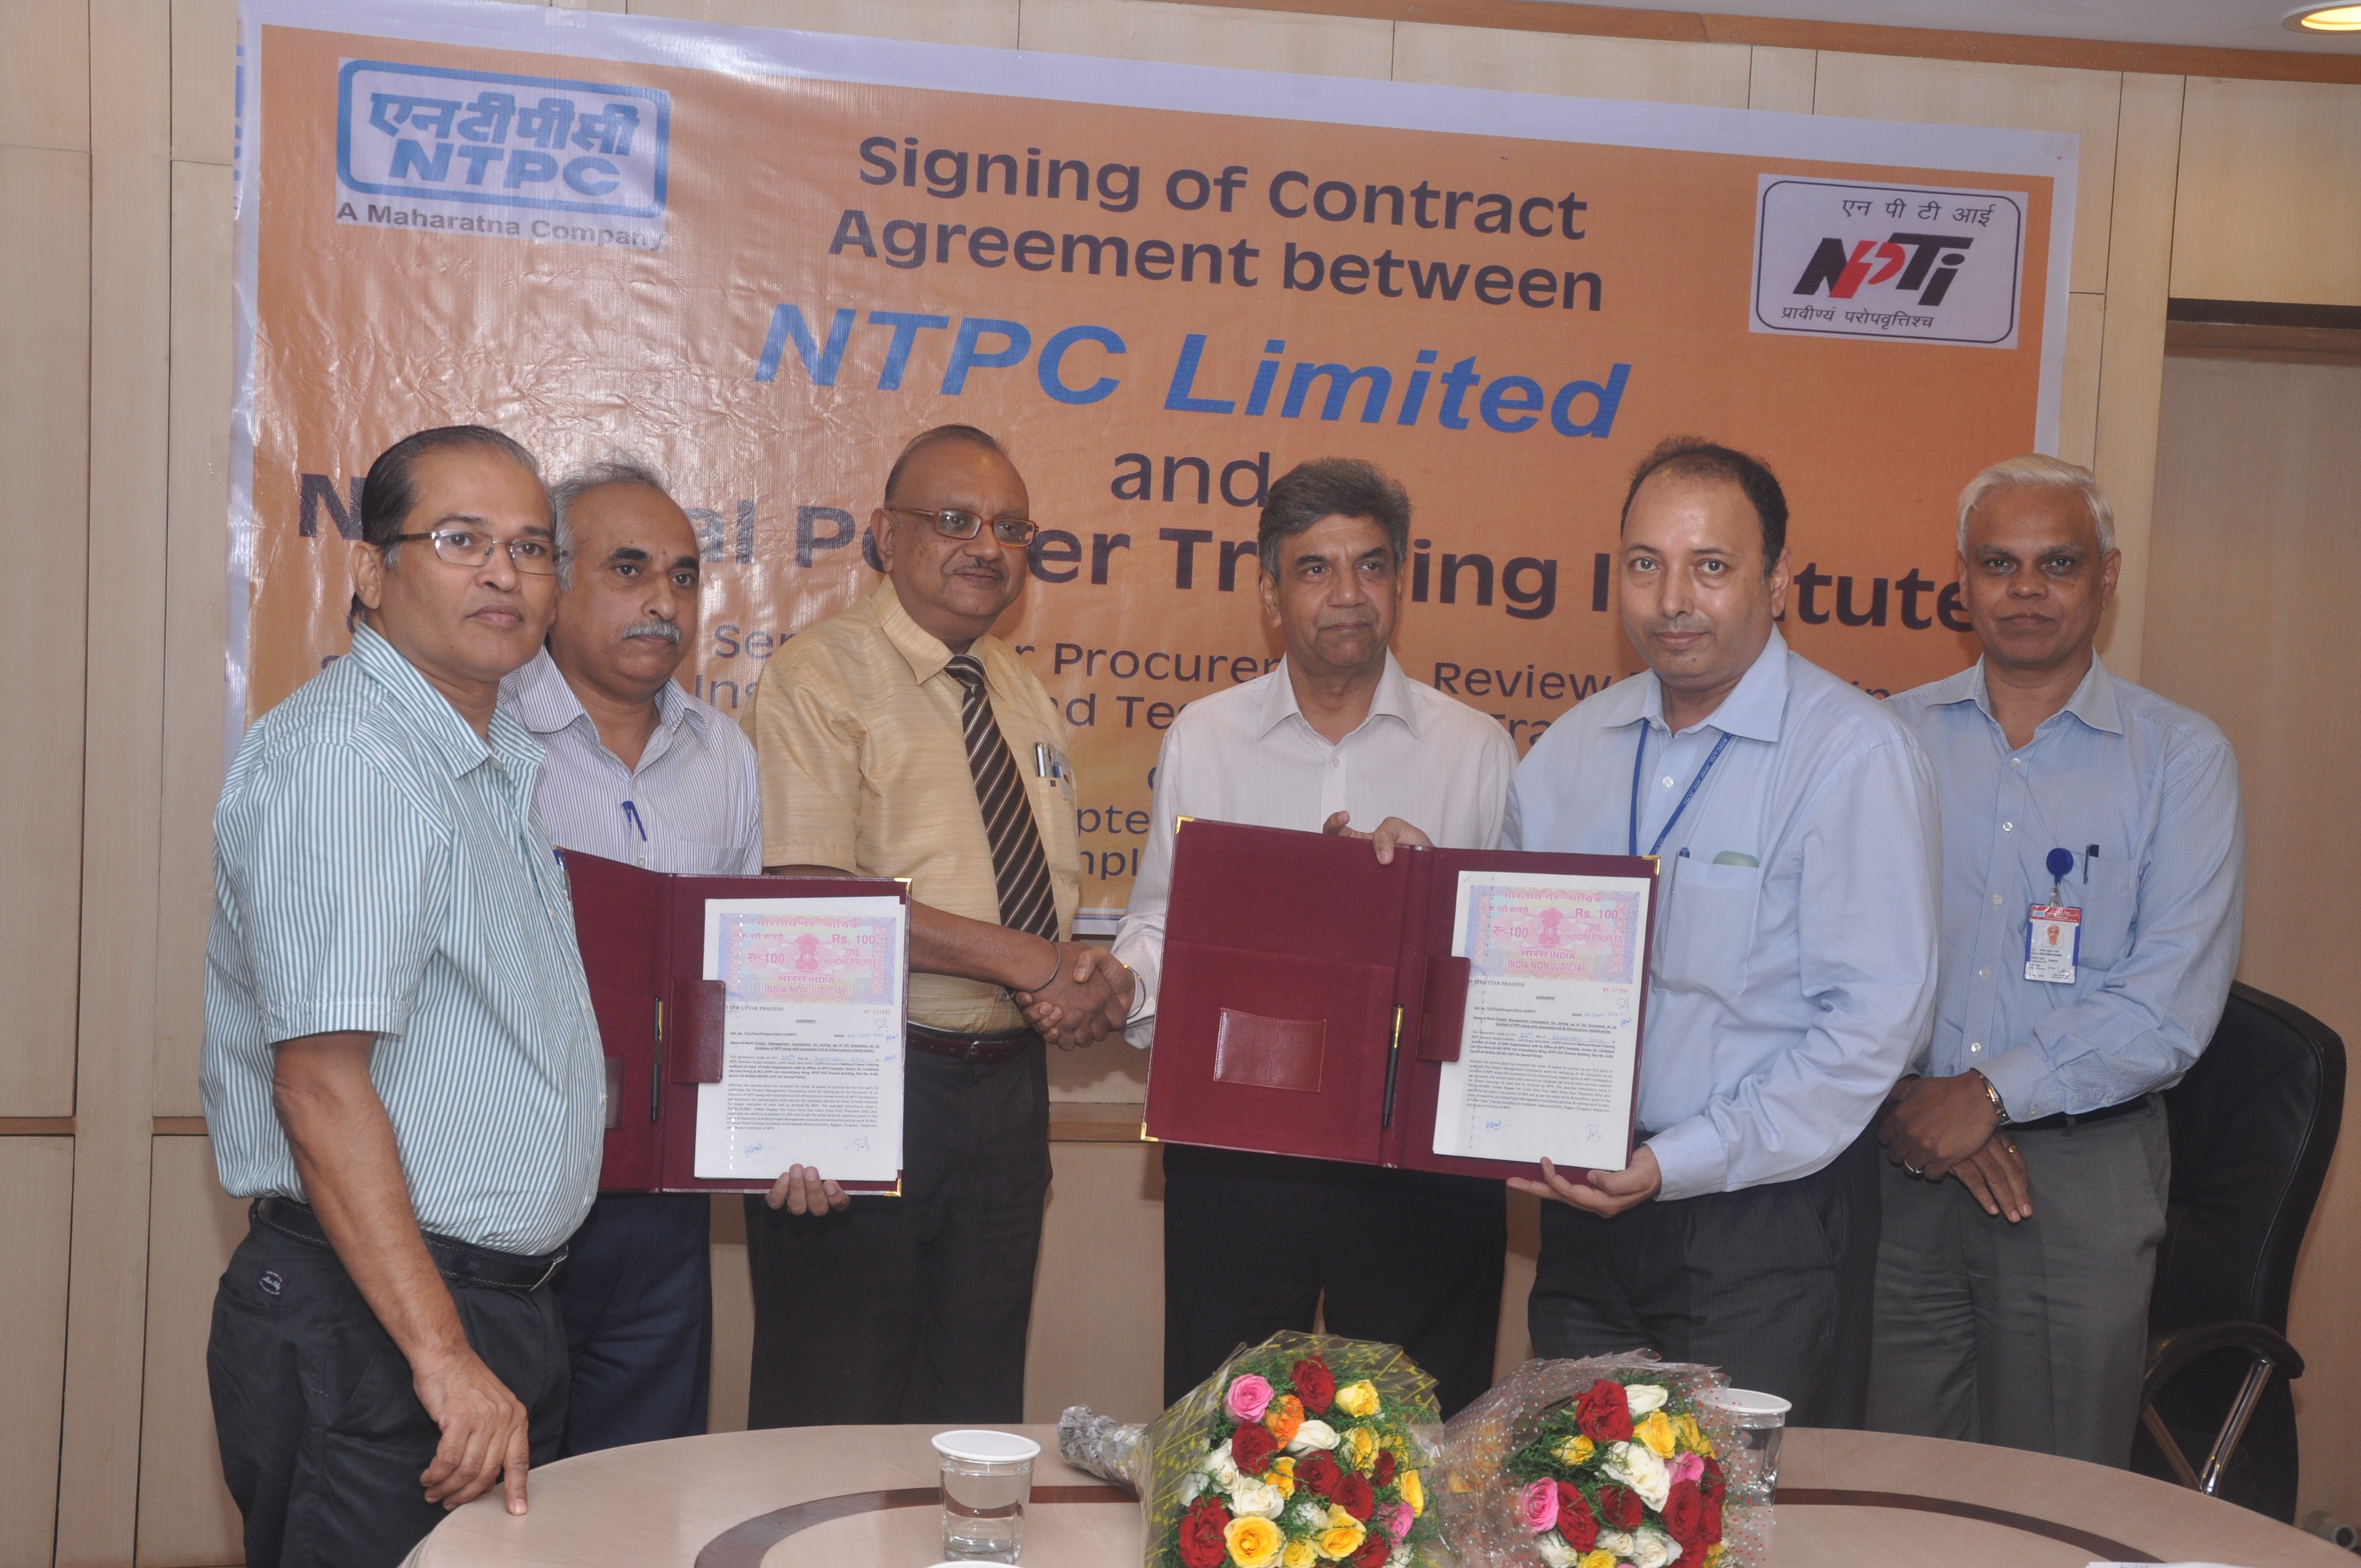 NTPC AND NPTI SIGNS A CONTRACT AGREEMENT FOR SKILL DEVELOPMENT